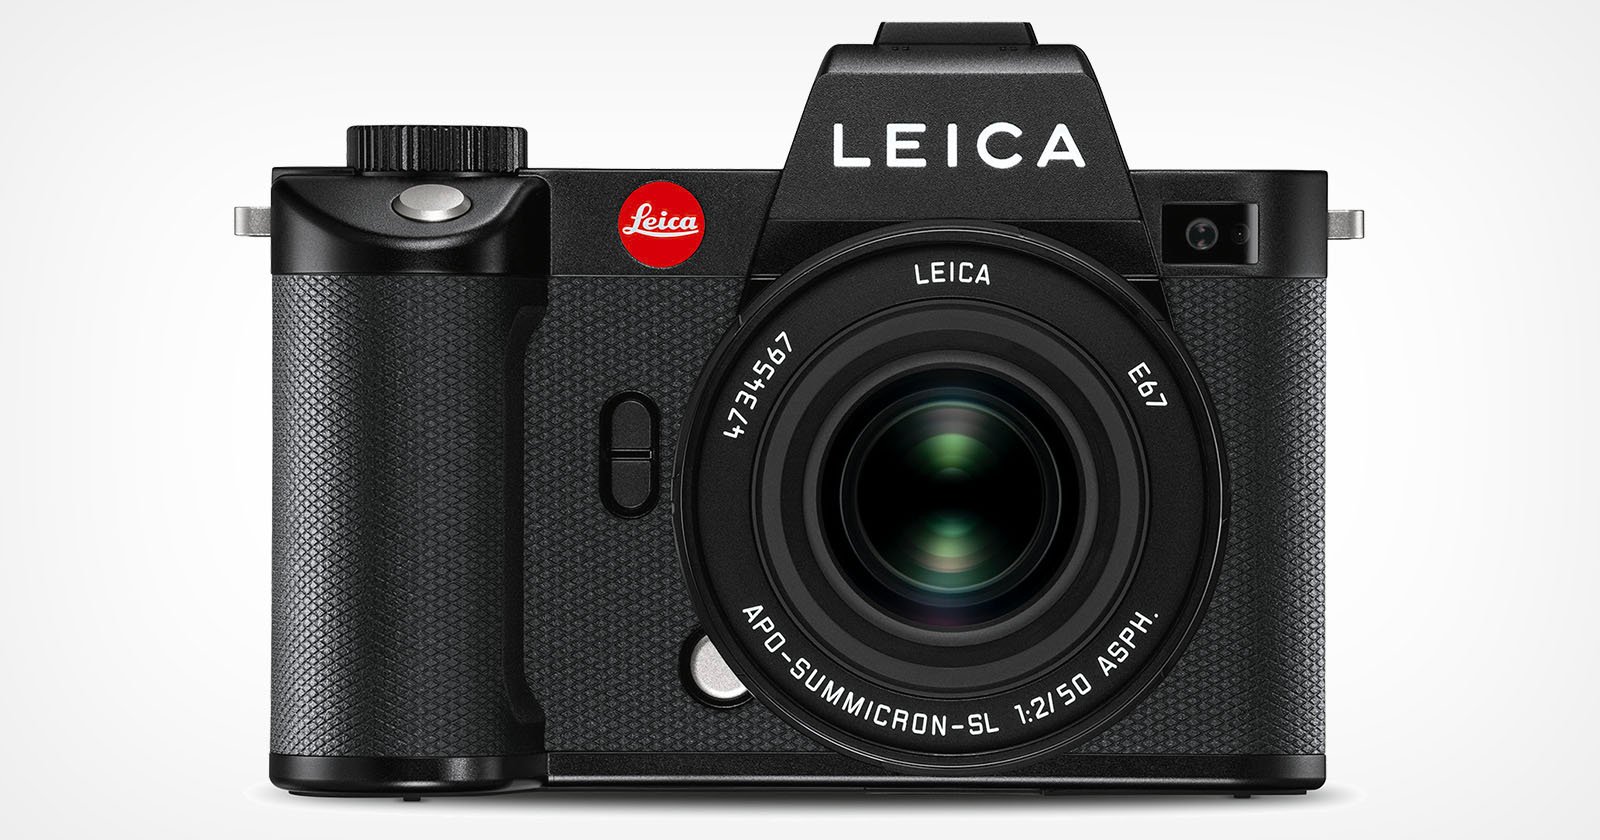  leica four firmware upgrades feature worthwhile improvements 